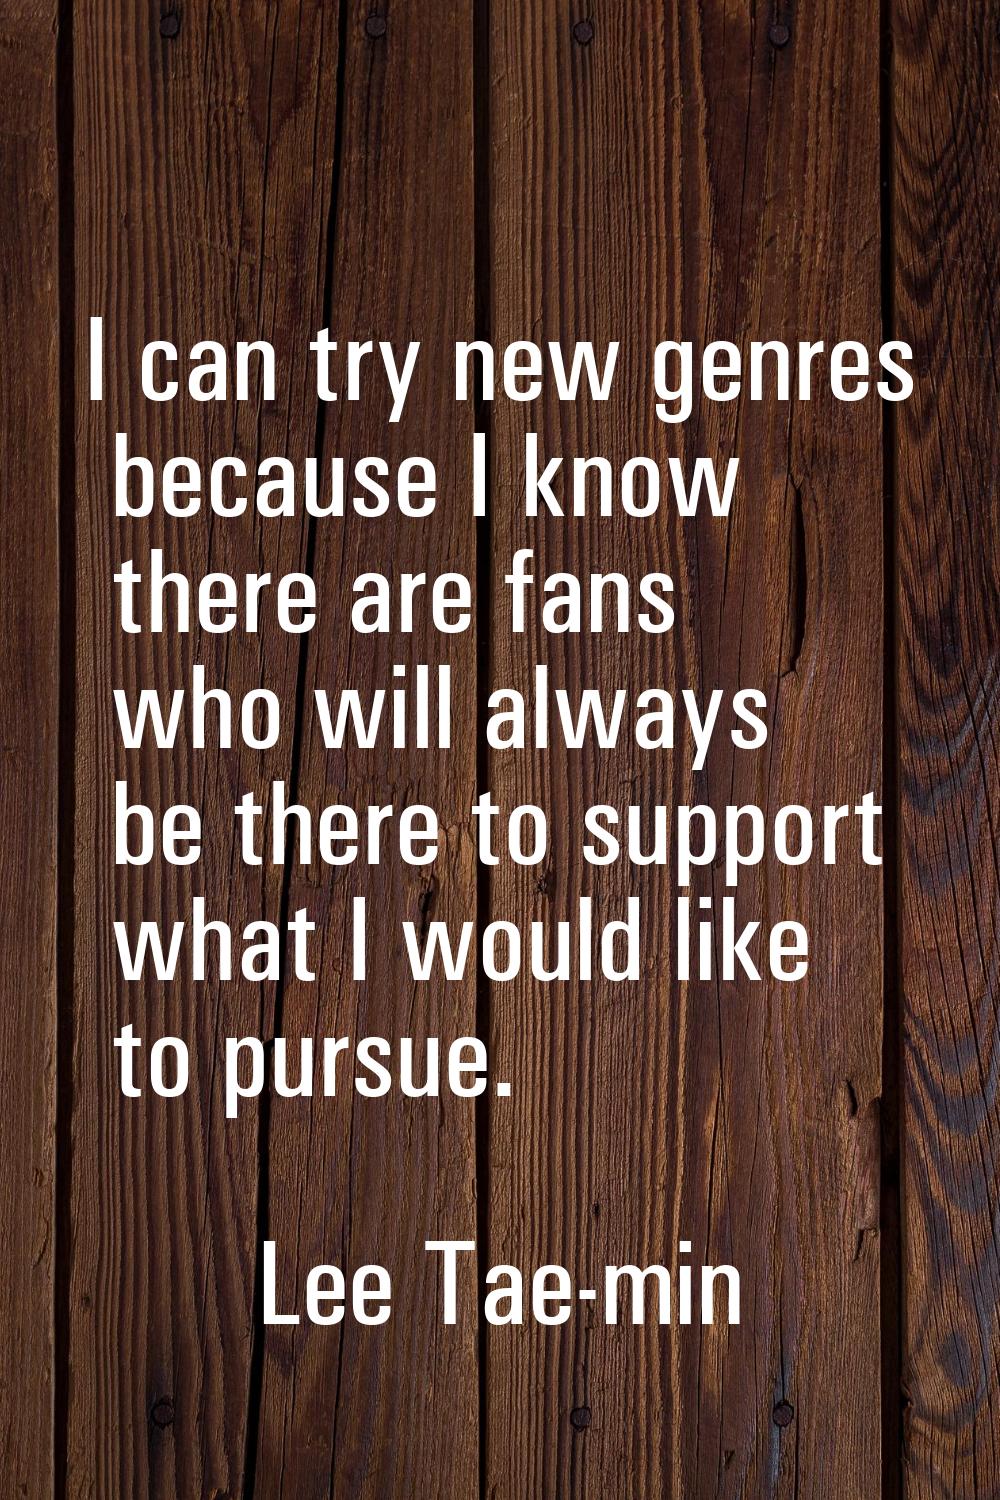 I can try new genres because I know there are fans who will always be there to support what I would